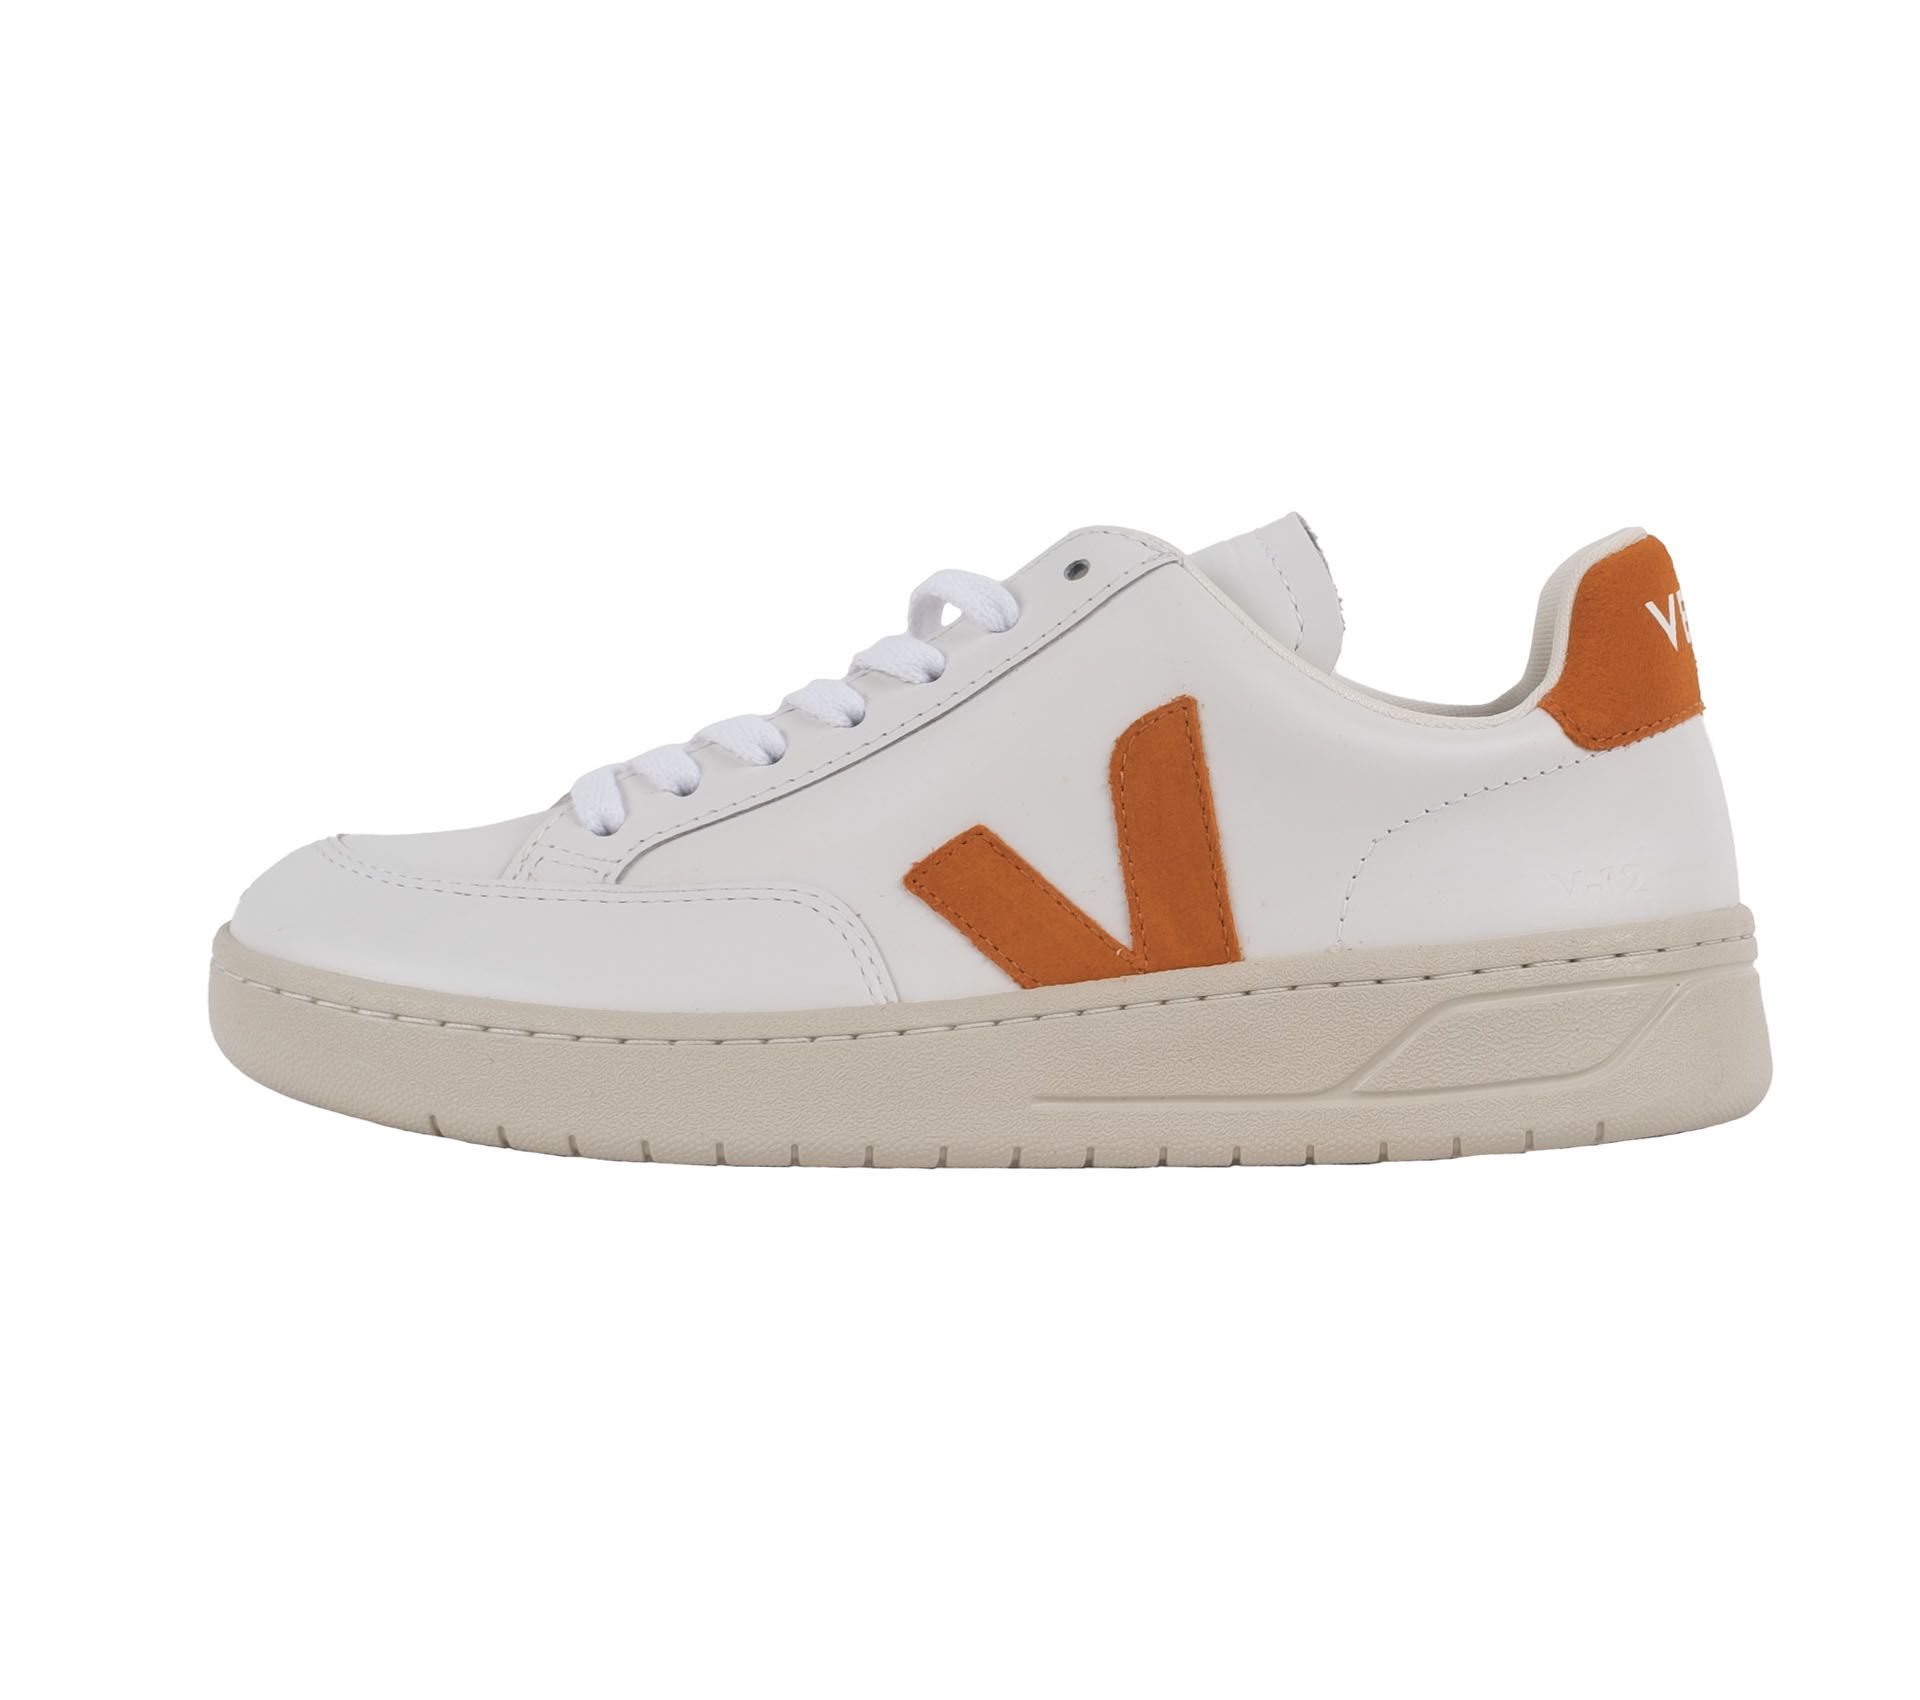 Image #1 of V-12 LEATHER EXTRA WHITE PUMPKIN